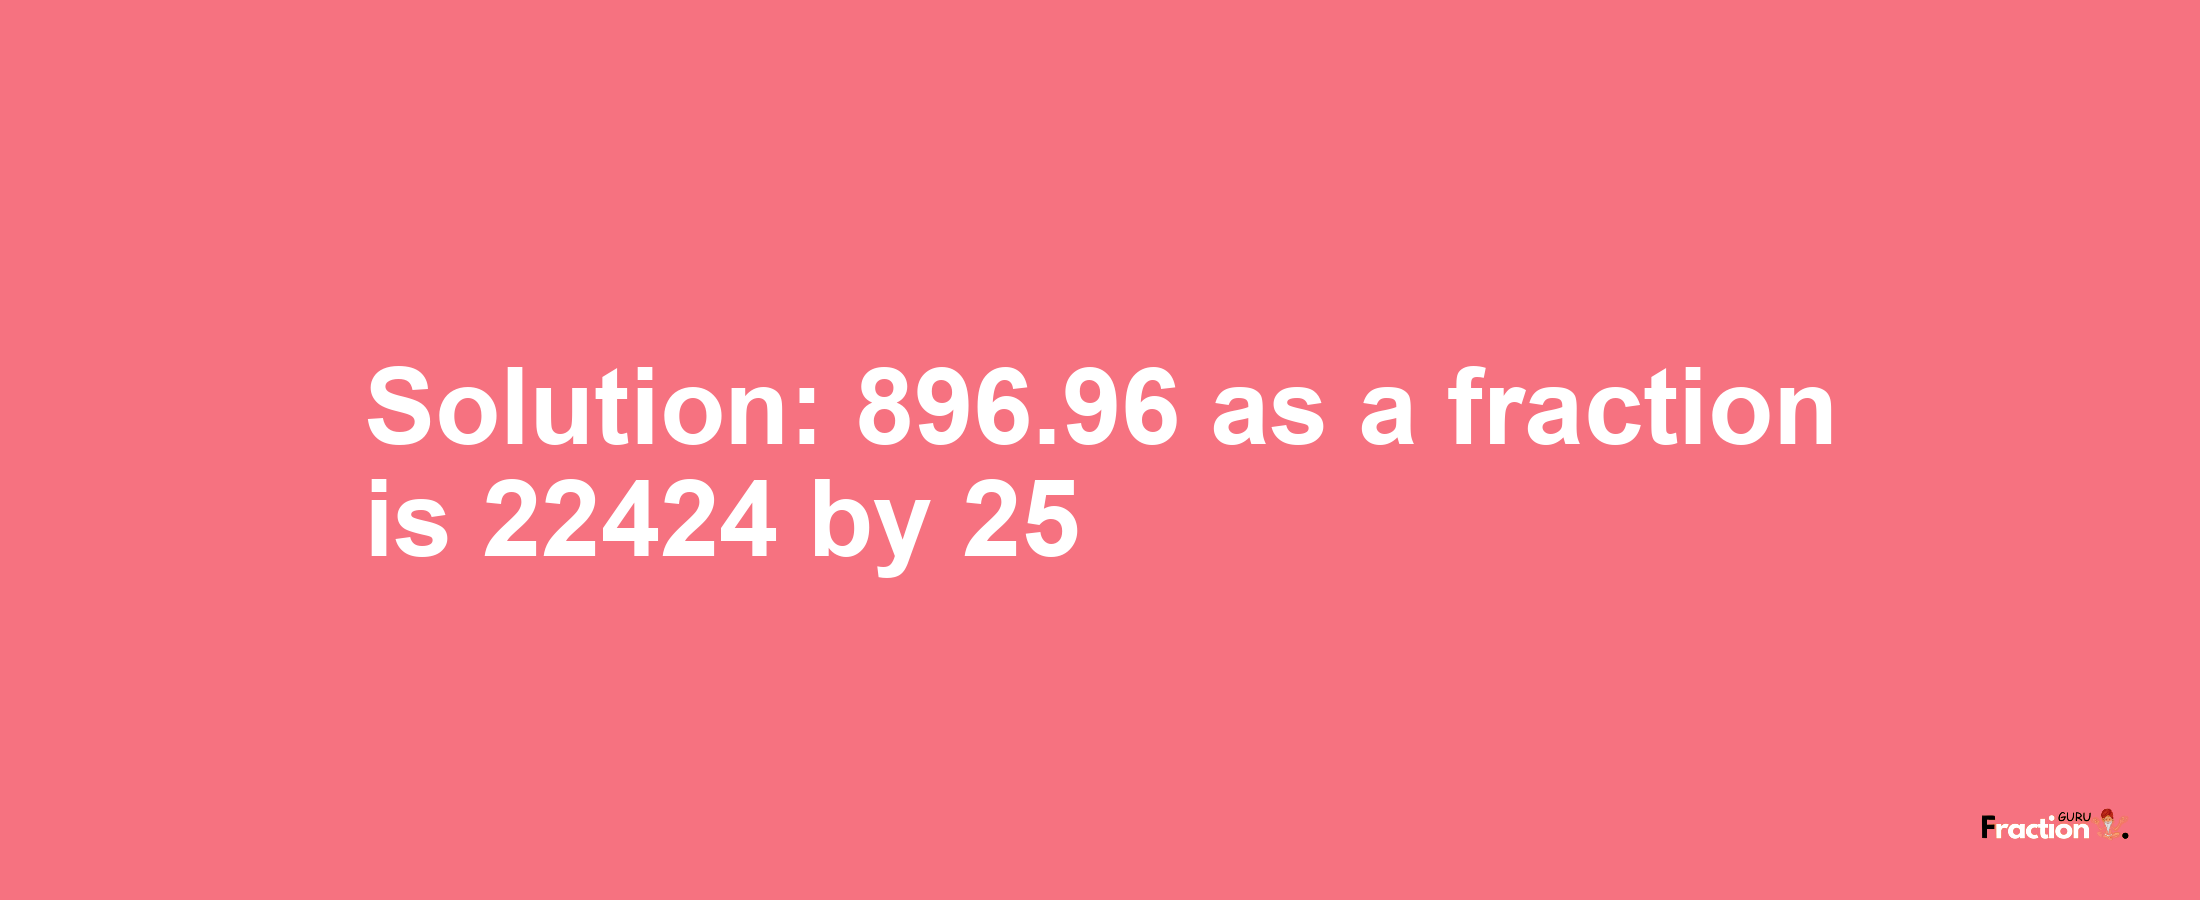 Solution:896.96 as a fraction is 22424/25